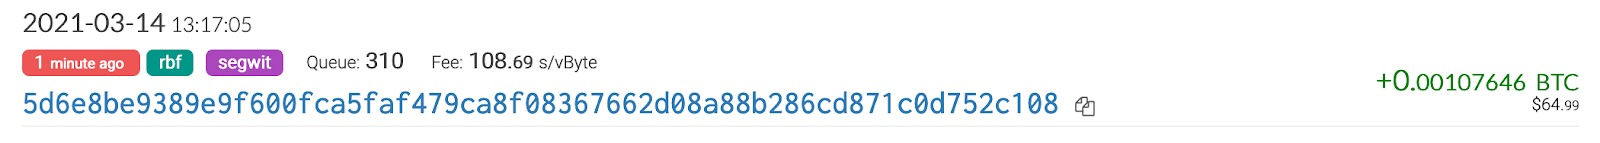 Screenshot of the transaction ID for the Bitcoin yielded from Easy Crypto.